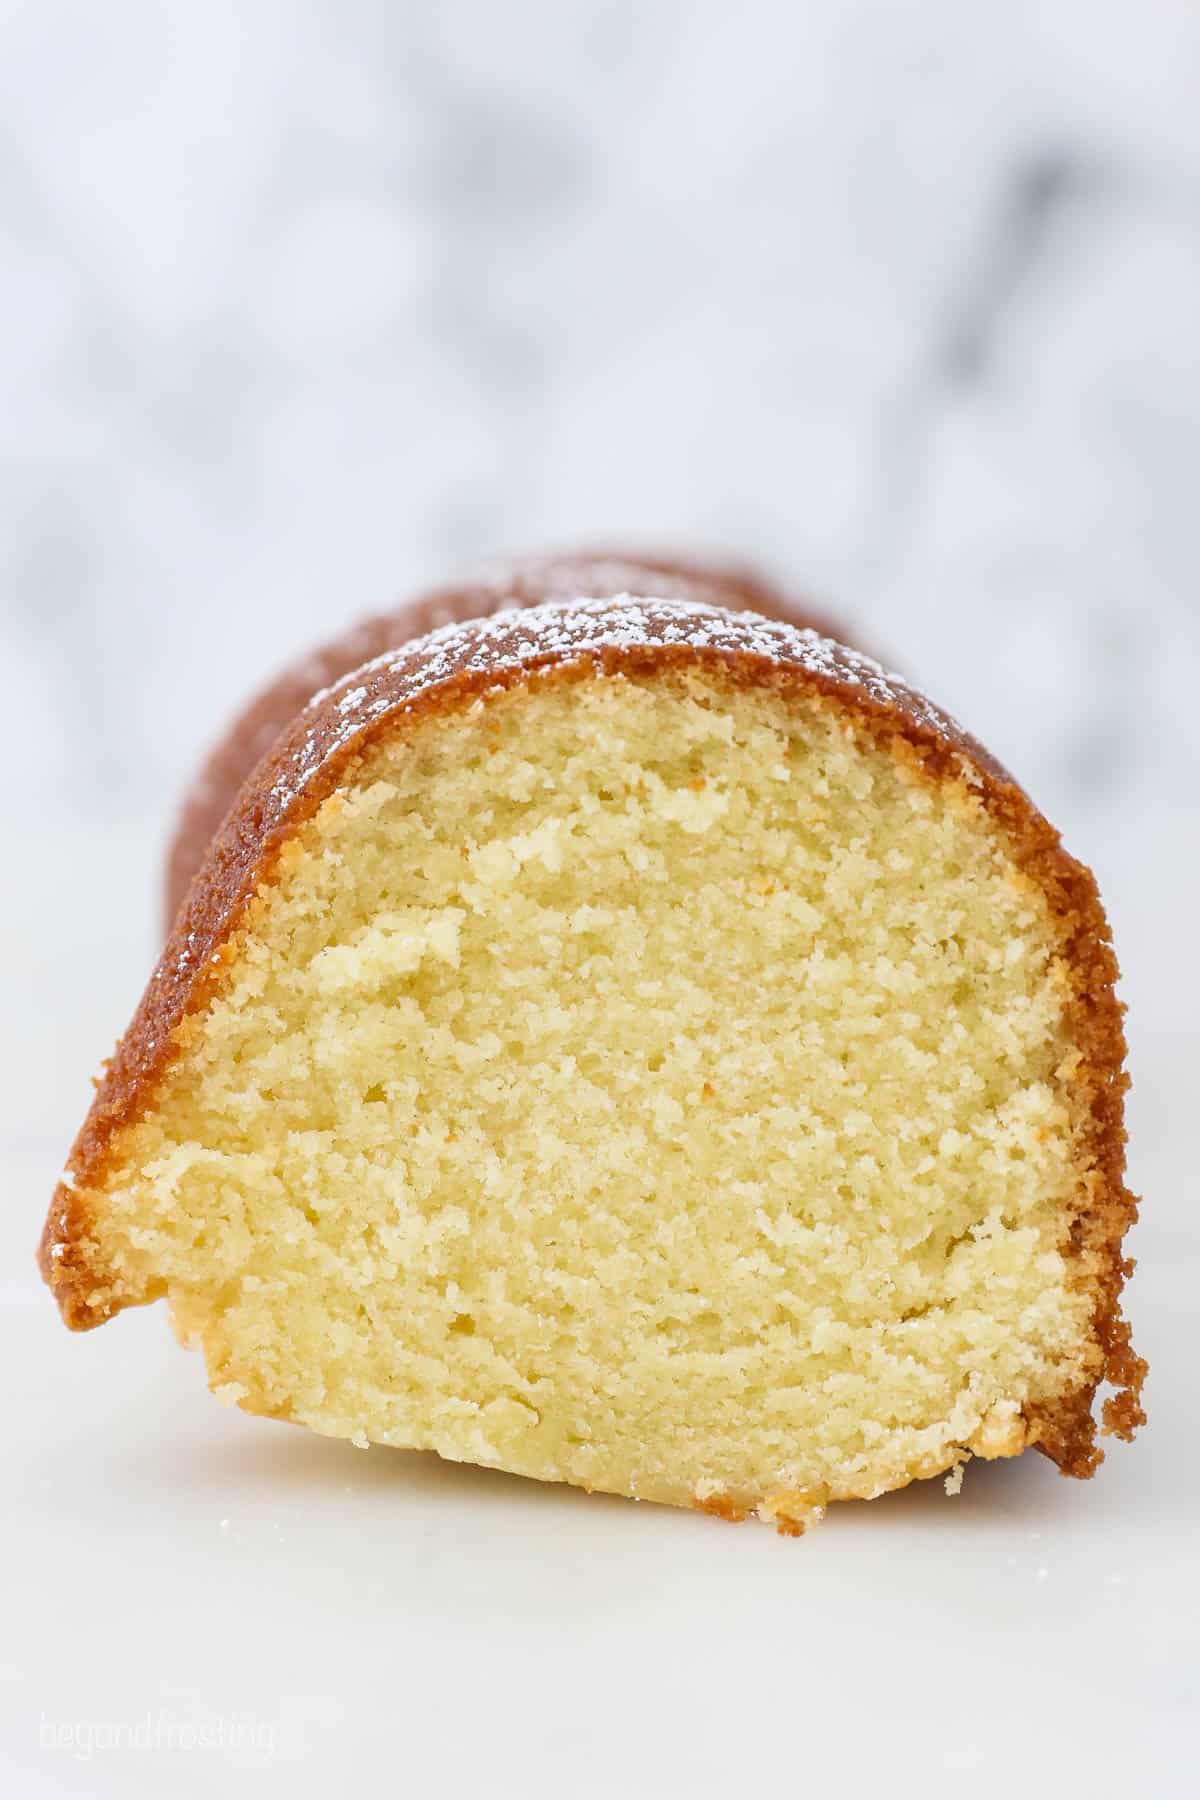 A slice of pound cake topped with a dusting of powdered sugar shown from the side